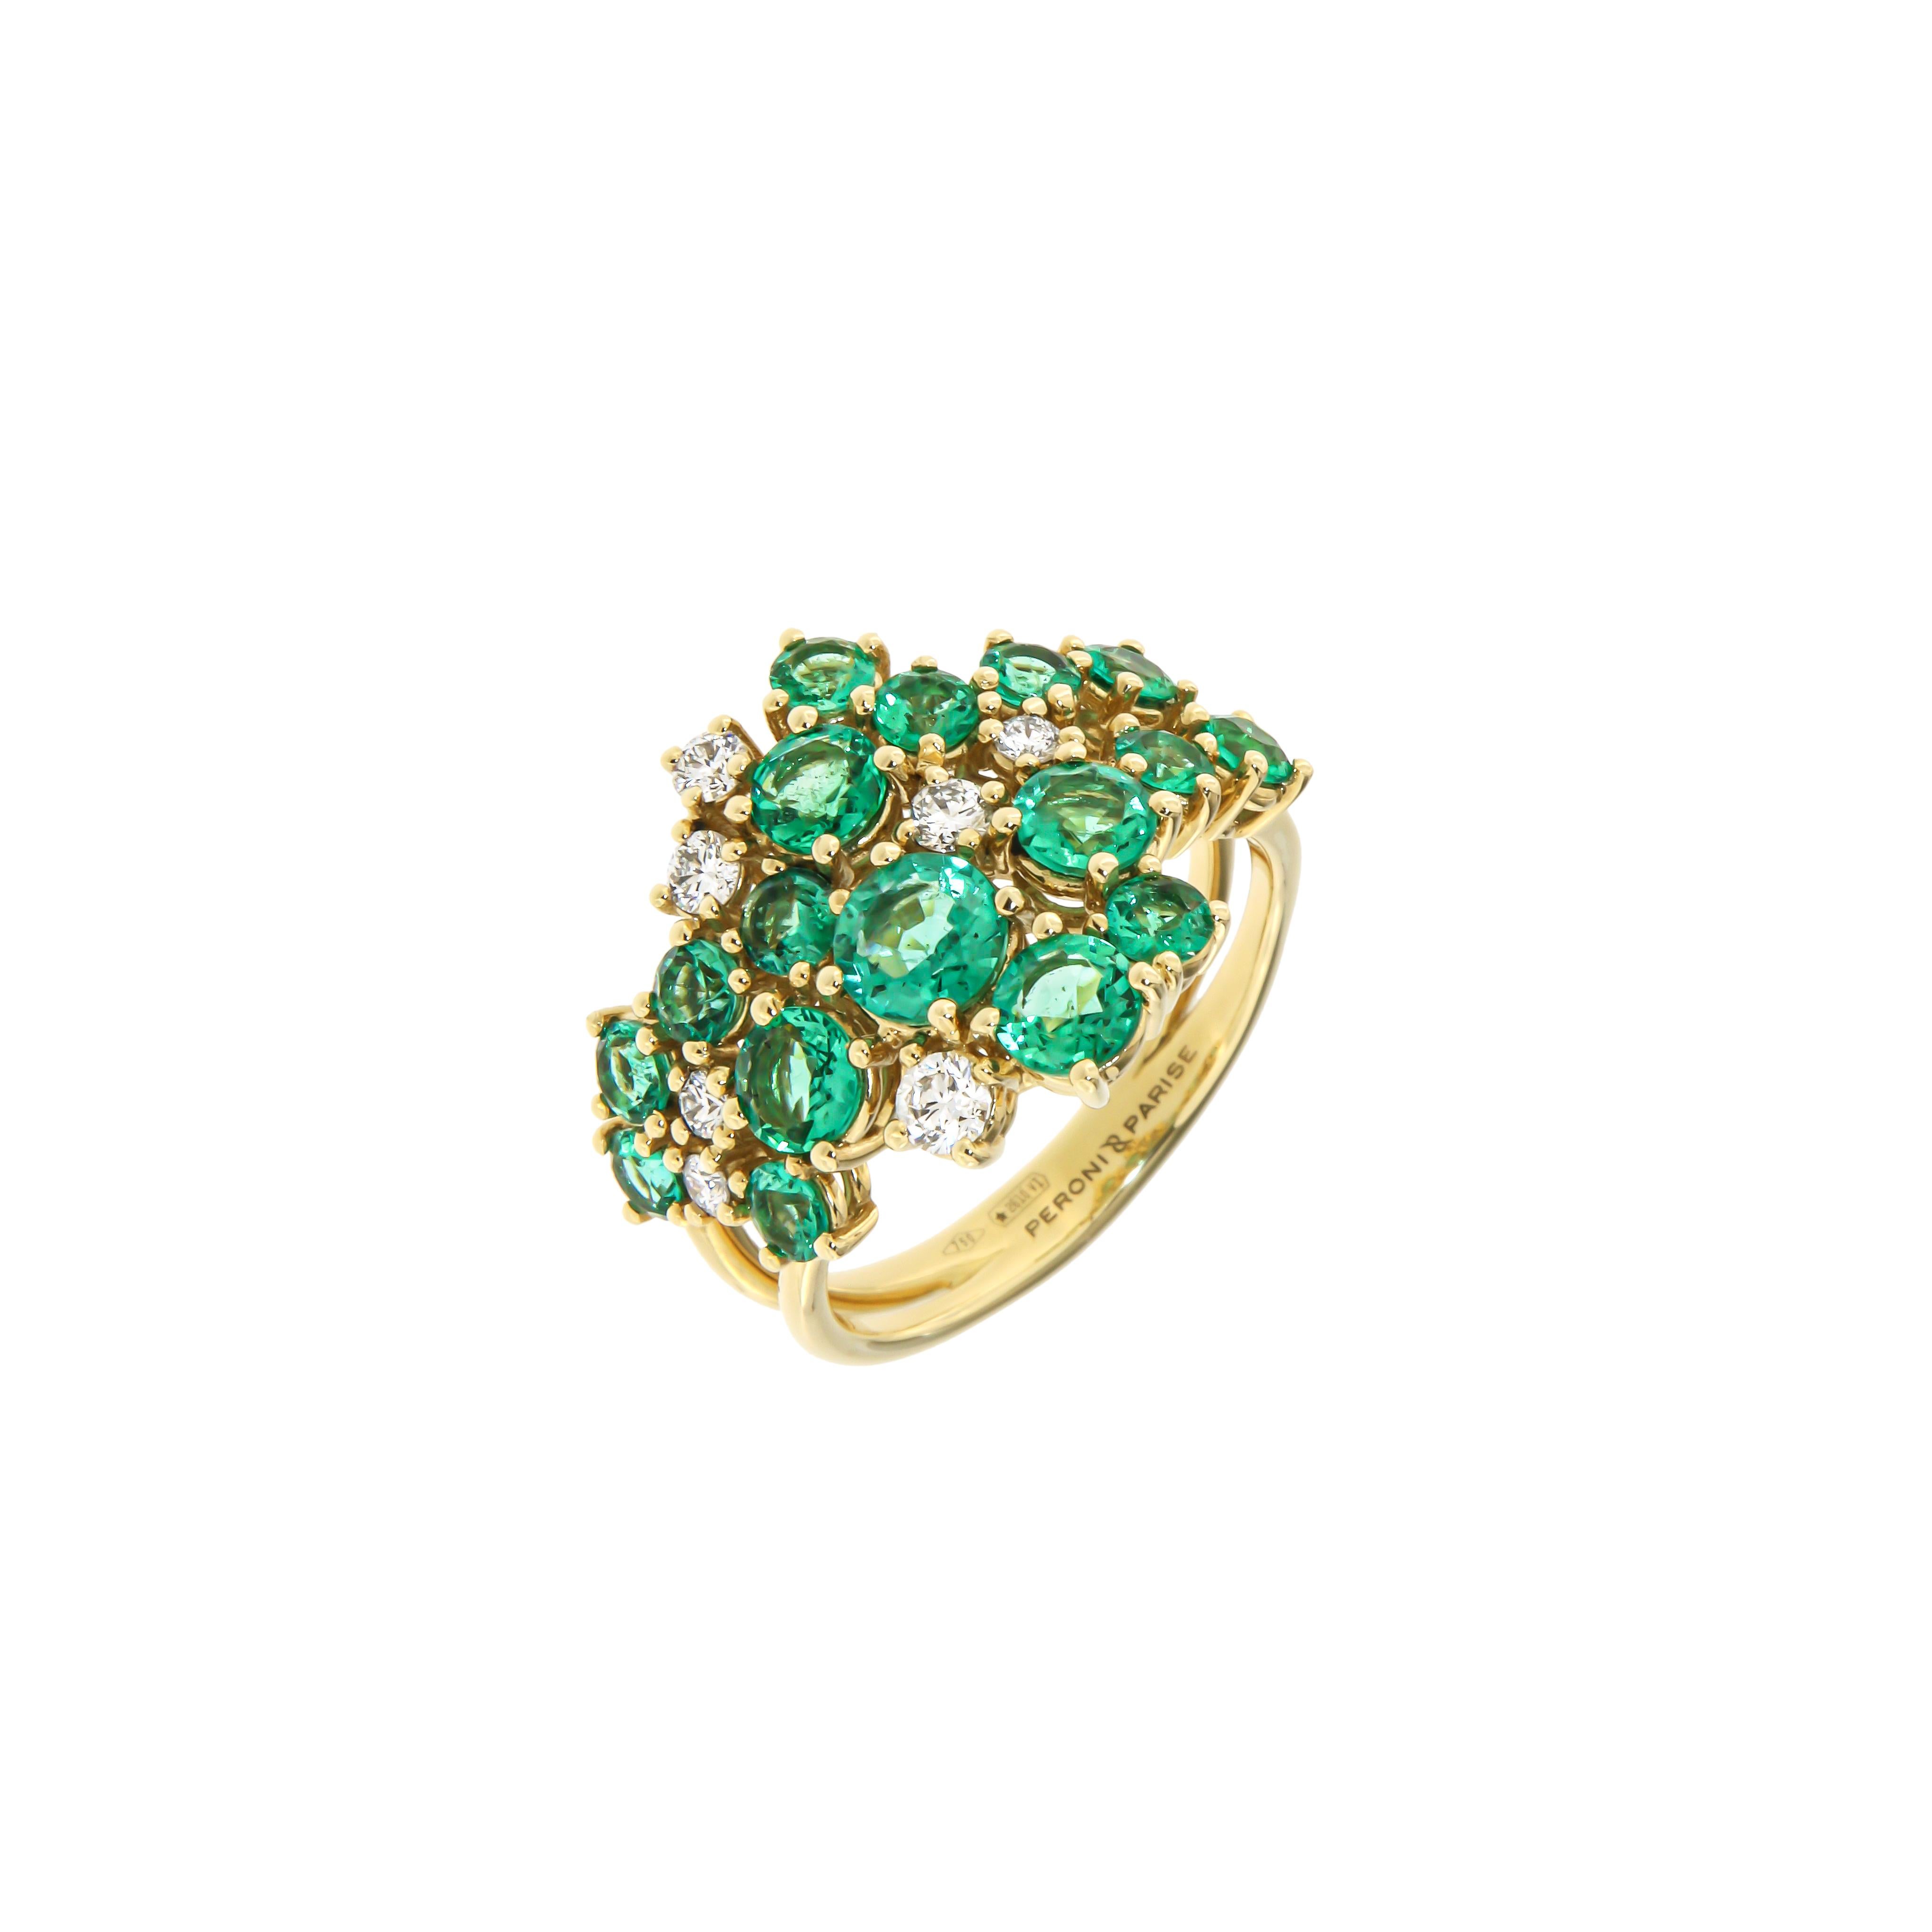 Ring Yellow Gold 18 K 
Ring Yellow Gold Emerald Available Also
Diamonds 0,40ct
Ruby

Weight 5.30 grams
Adjustable Size

With a heritage of ancient fine Swiss jewelry traditions, NATKINA is a Geneva based jewellery brand, which creates modern